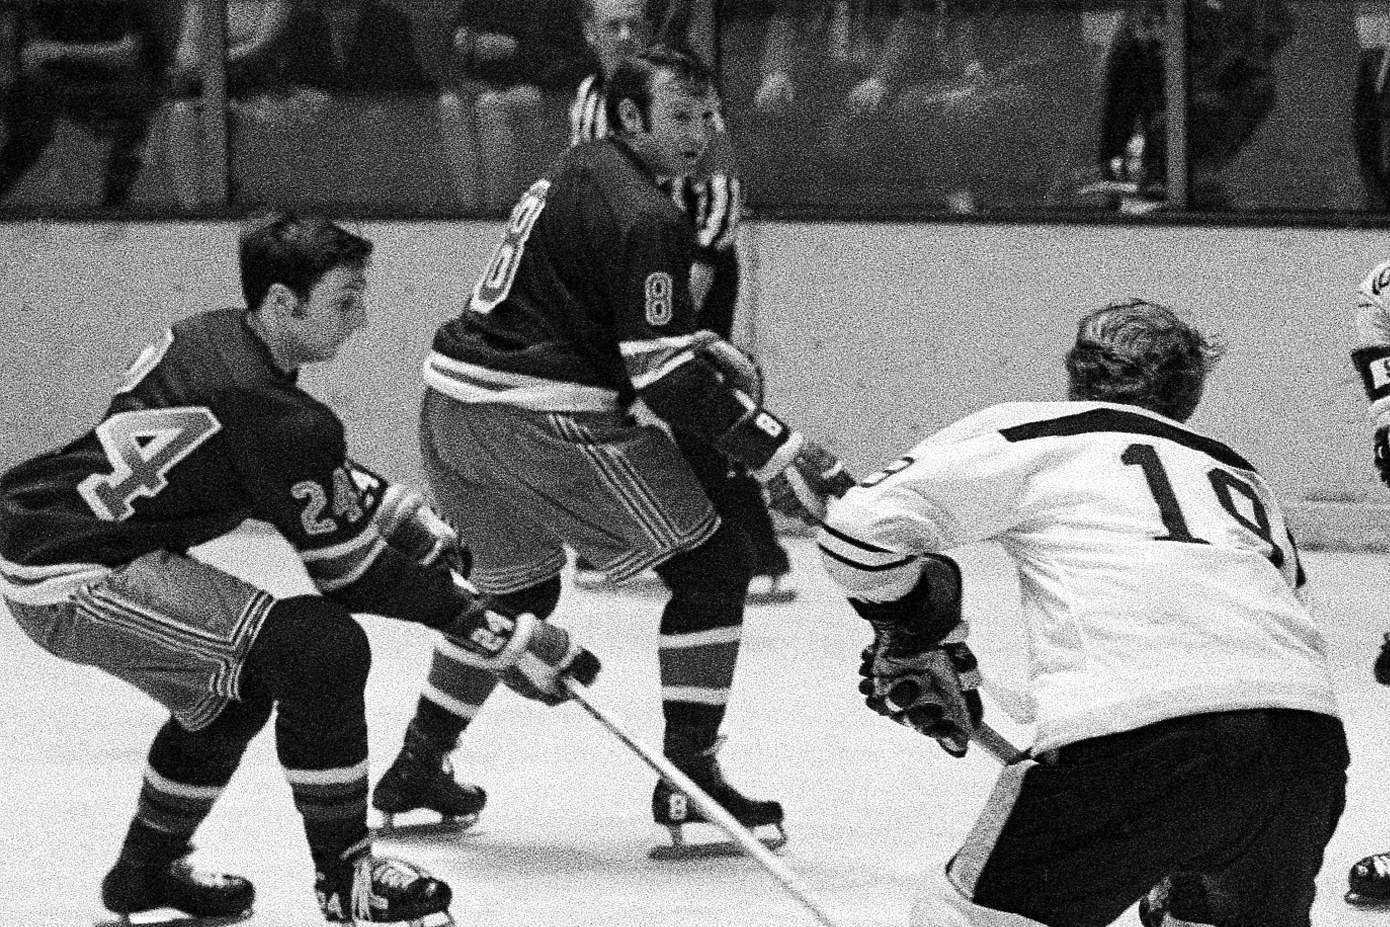 Bob Nevin, won 2 Stanley Cups with Maple Leafs, dies at 82